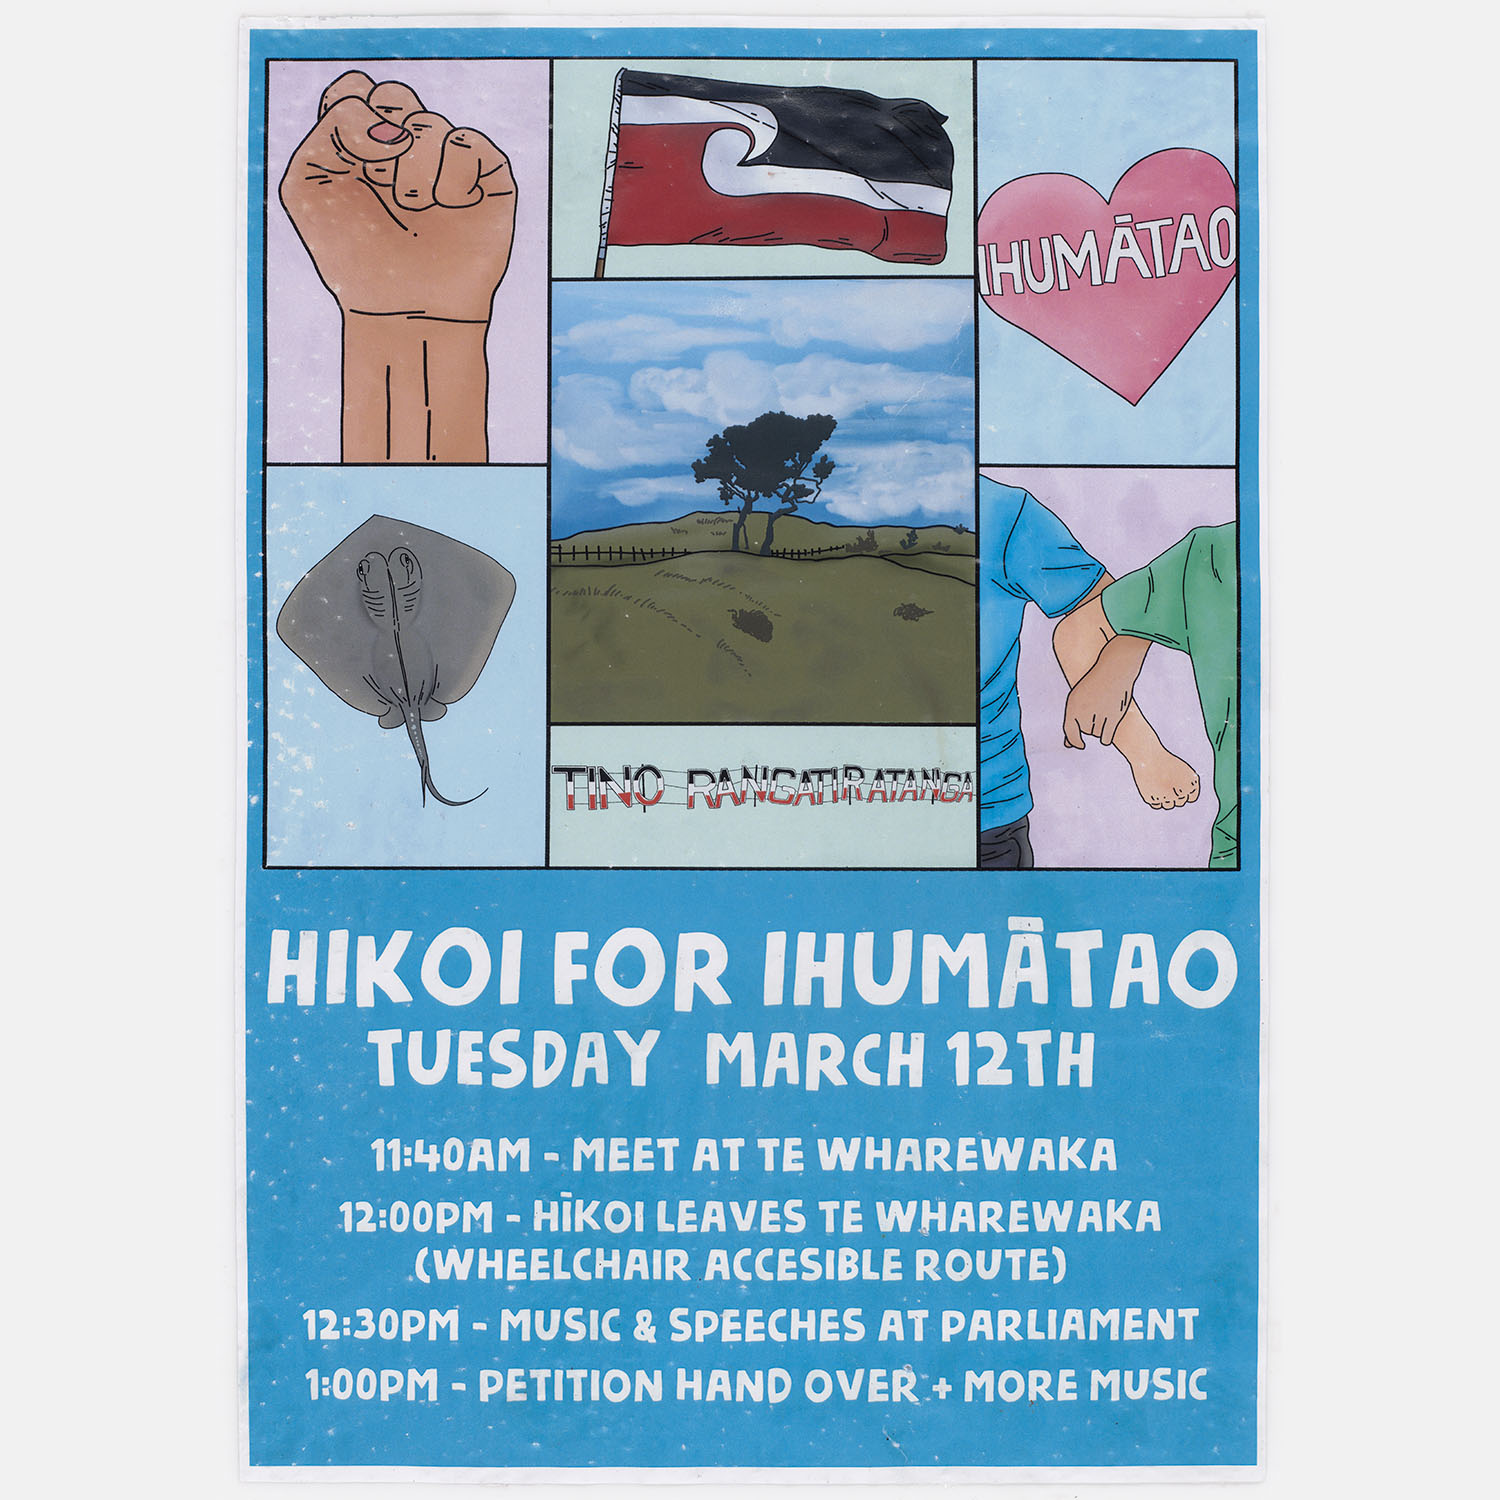 Flyer for a protest march, containing details and illustrations of a clenched fist, the tino rangatiratanga flag, a love heart with “Ihumātao” written inside it, two people linking arms, a ray, and a landscape scene